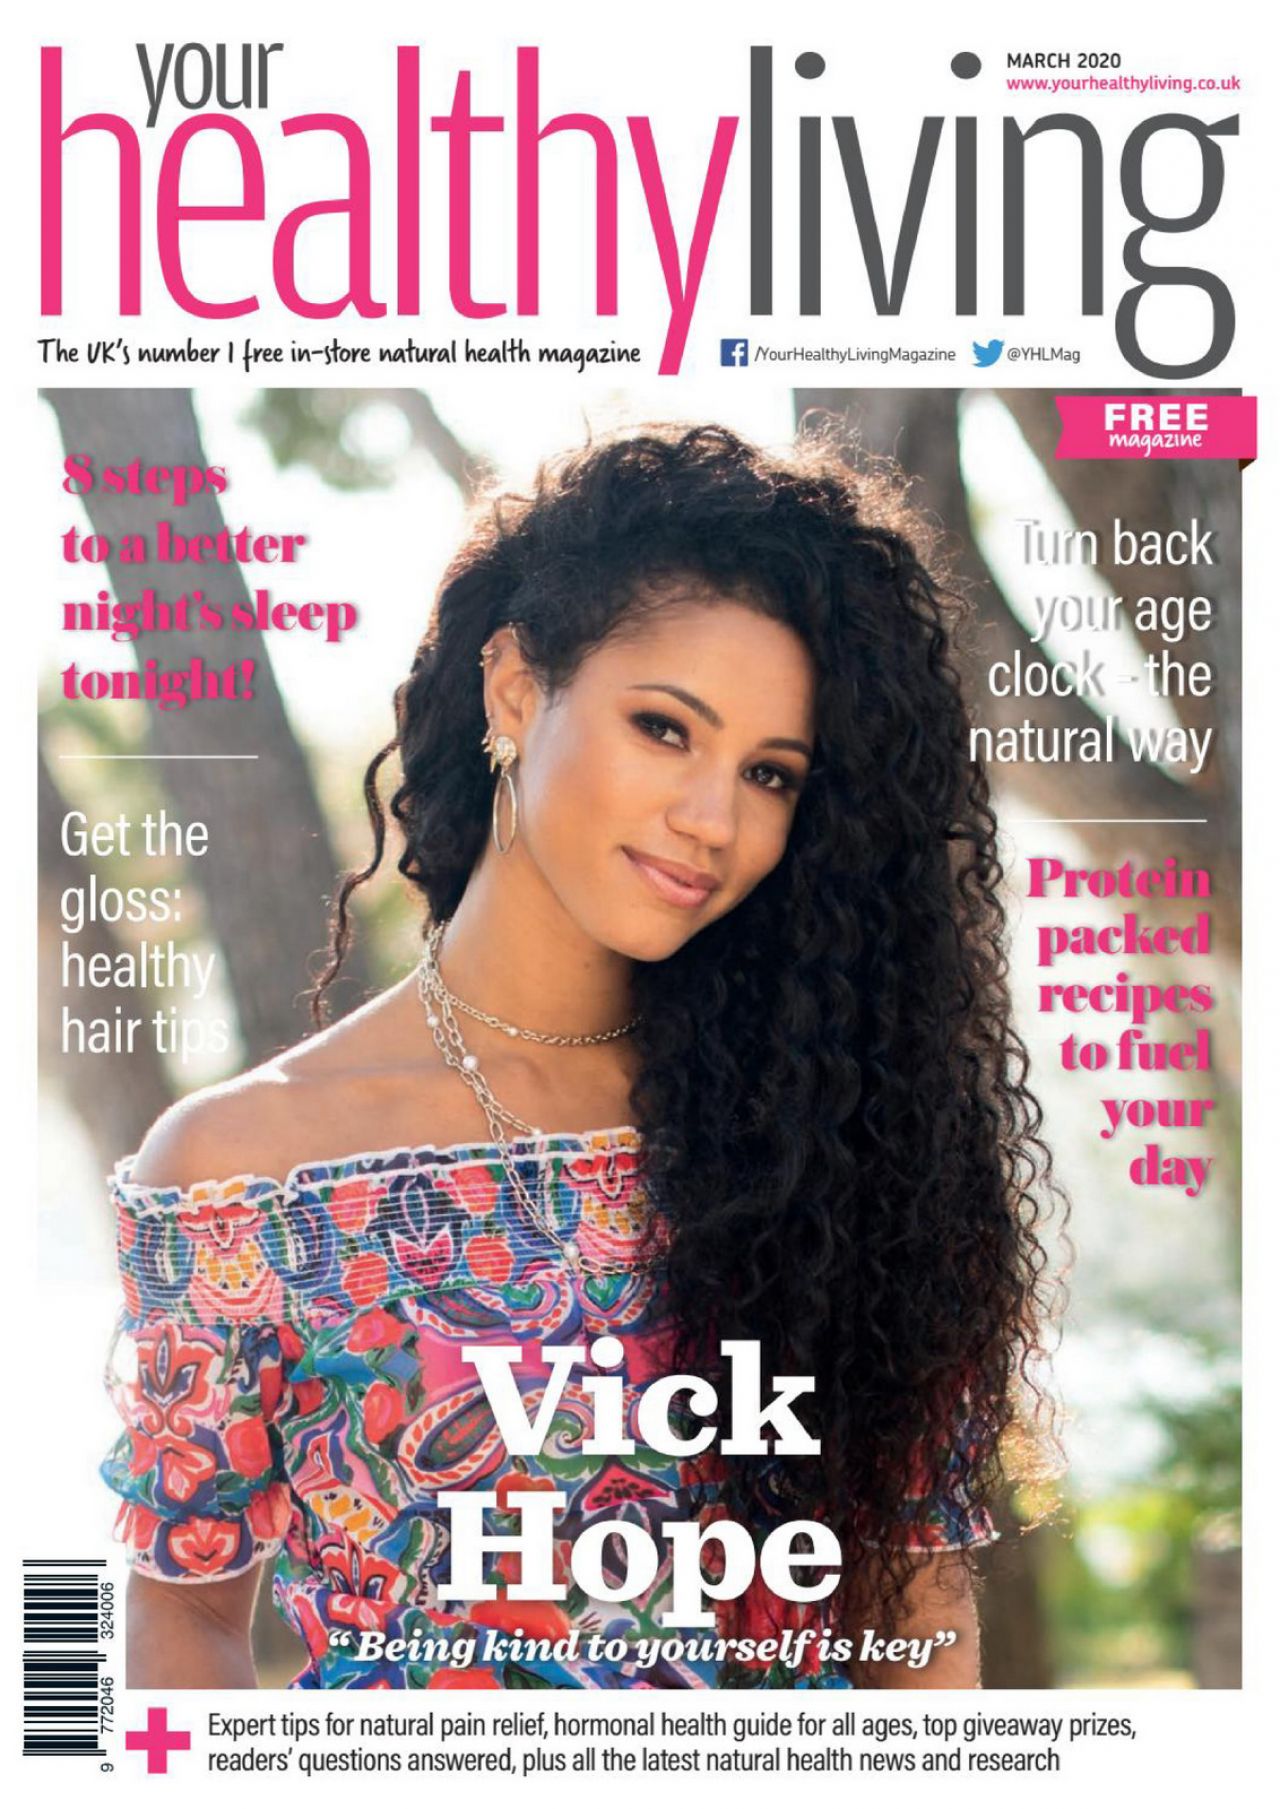 Vick Hope - Your Healthy Living Magazine March 2020 Issue ...